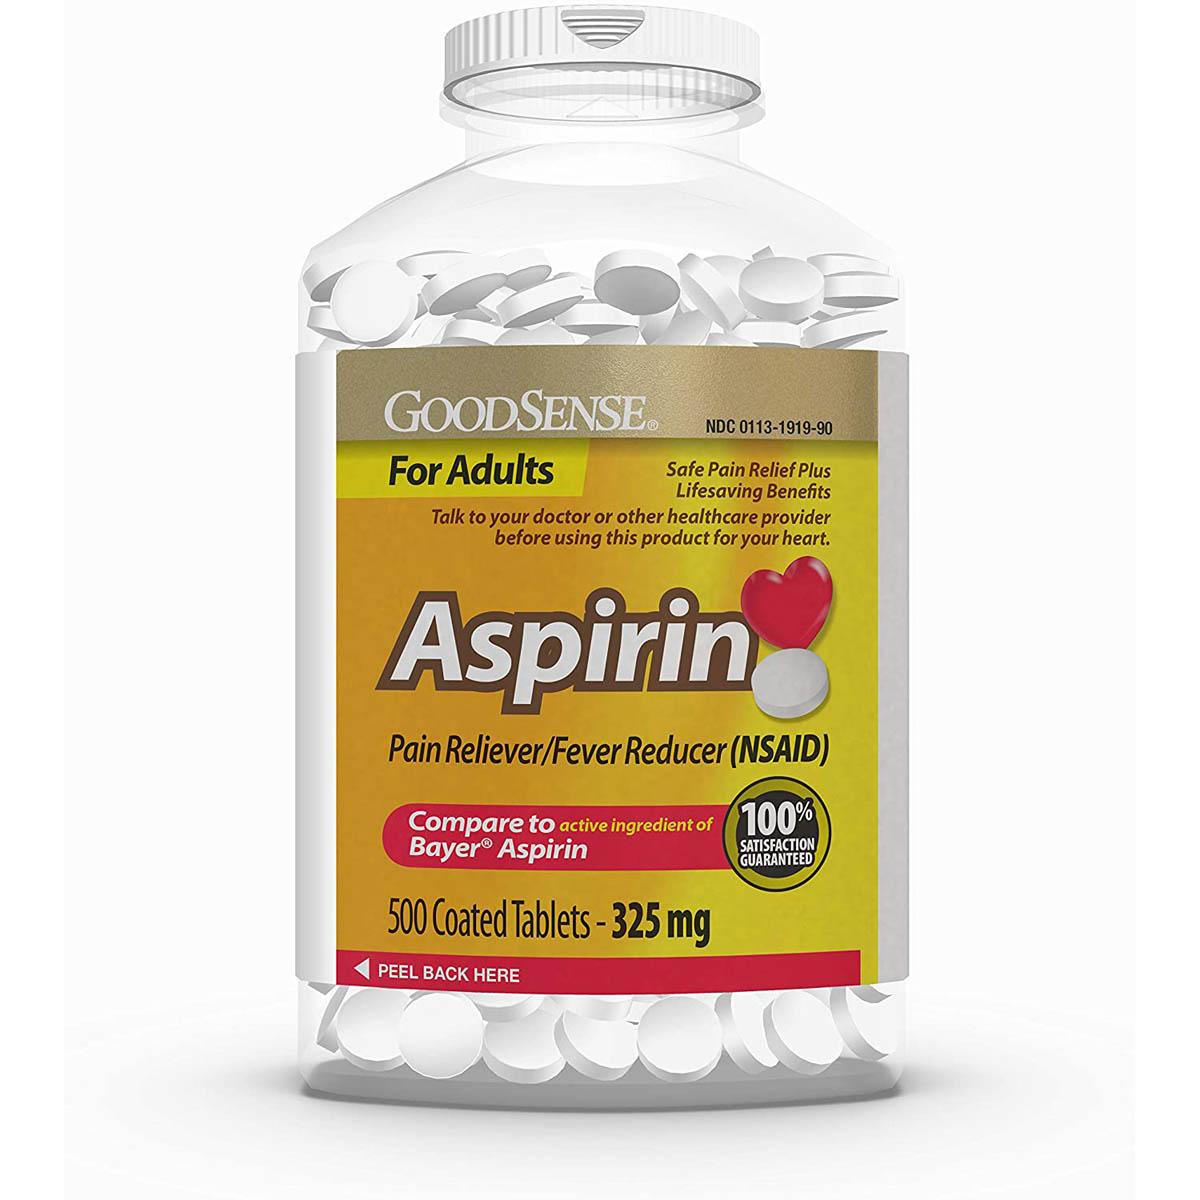 GoodSense Aspirin Pain Reliever Tablets for $2.84 Shipped